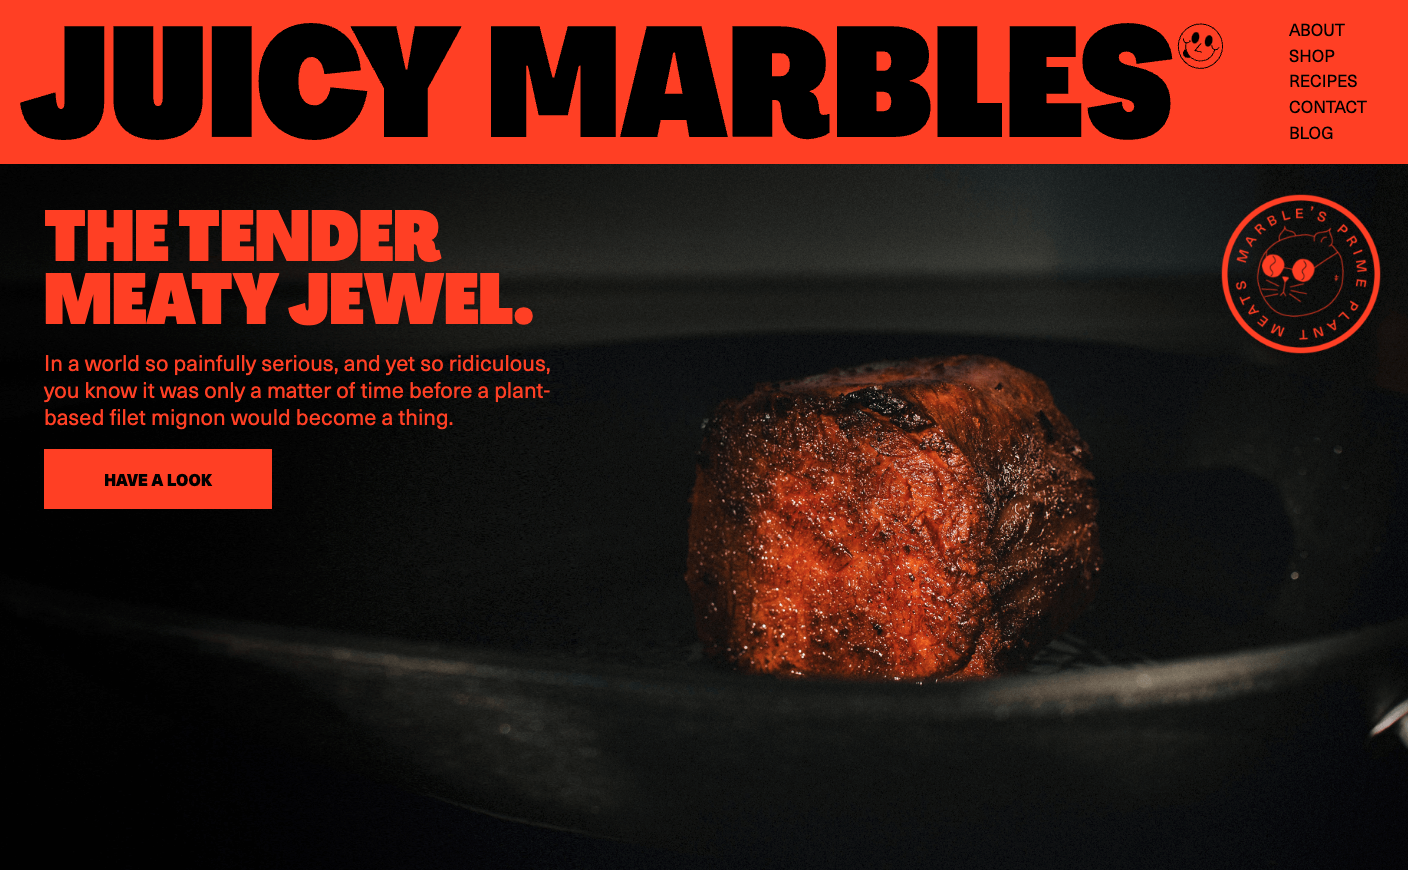 Big red and black text dominates the homepage image with a photos of Juicy Marble's succulent faux filet mignon.